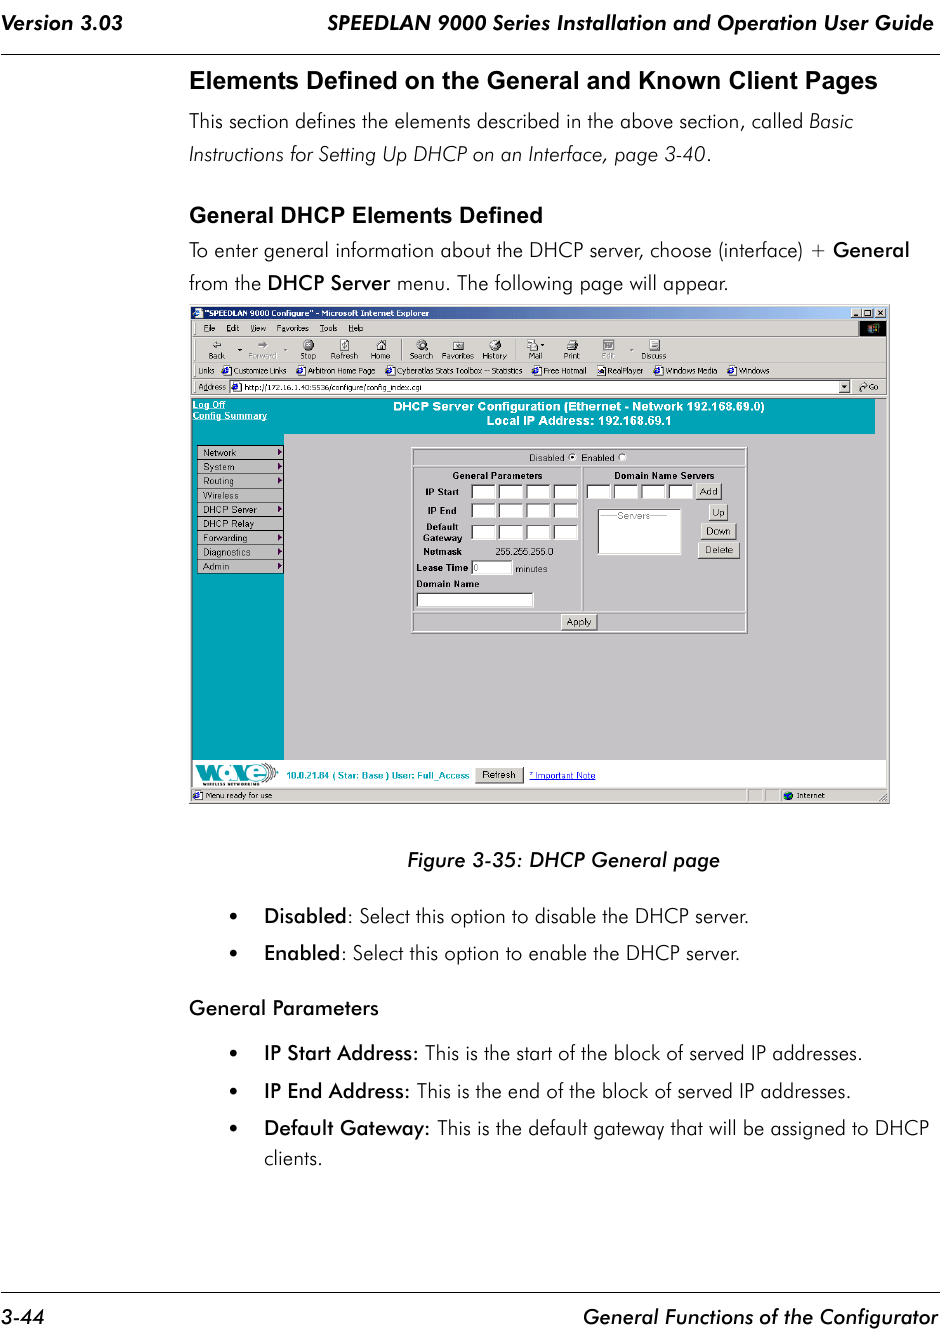 Version 3.03                                 SPEEDLAN 9000 Series Installation and Operation User Guide 3-44 General Functions of the ConfiguratorElements Defined on the General and Known Client PagesThis section defines the elements described in the above section, called Basic Instructions for Setting Up DHCP on an Interface, page 3-40. General DHCP Elements DefinedTo enter general information about the DHCP server, choose (interface) + General from the DHCP Server menu. The following page will appear.Figure 3-35: DHCP General page•Disabled: Select this option to disable the DHCP server.•Enabled: Select this option to enable the DHCP server.General Parameters•IP Start Address: This is the start of the block of served IP addresses.•IP End Address: This is the end of the block of served IP addresses.•Default Gateway: This is the default gateway that will be assigned to DHCP clients.